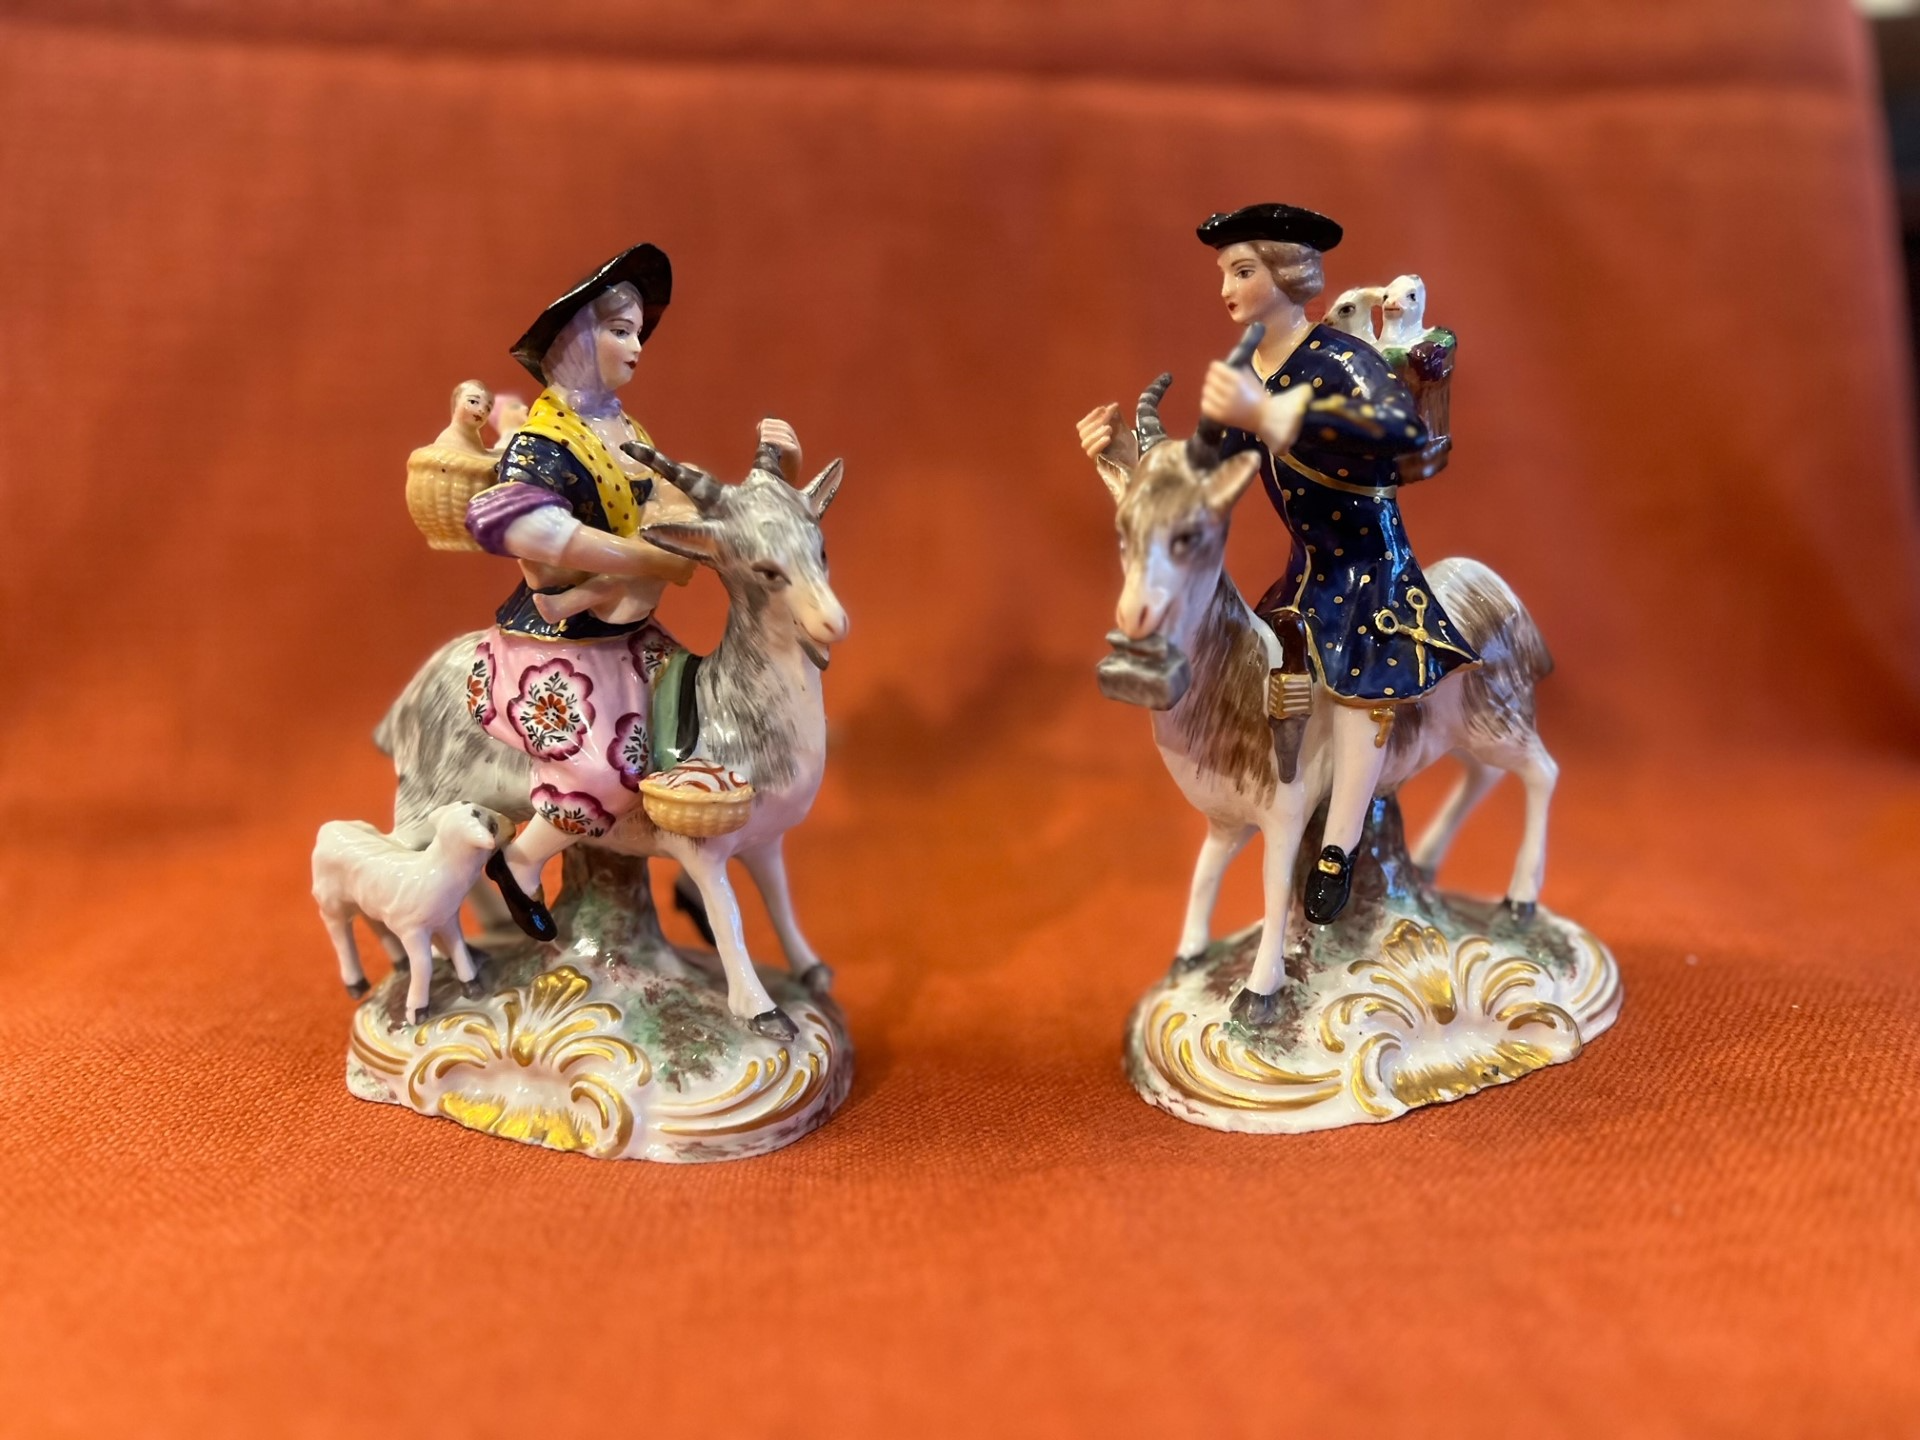 A fine pair of porcelain figures of the tailor and his wife, high quality figures. - Image 13 of 16